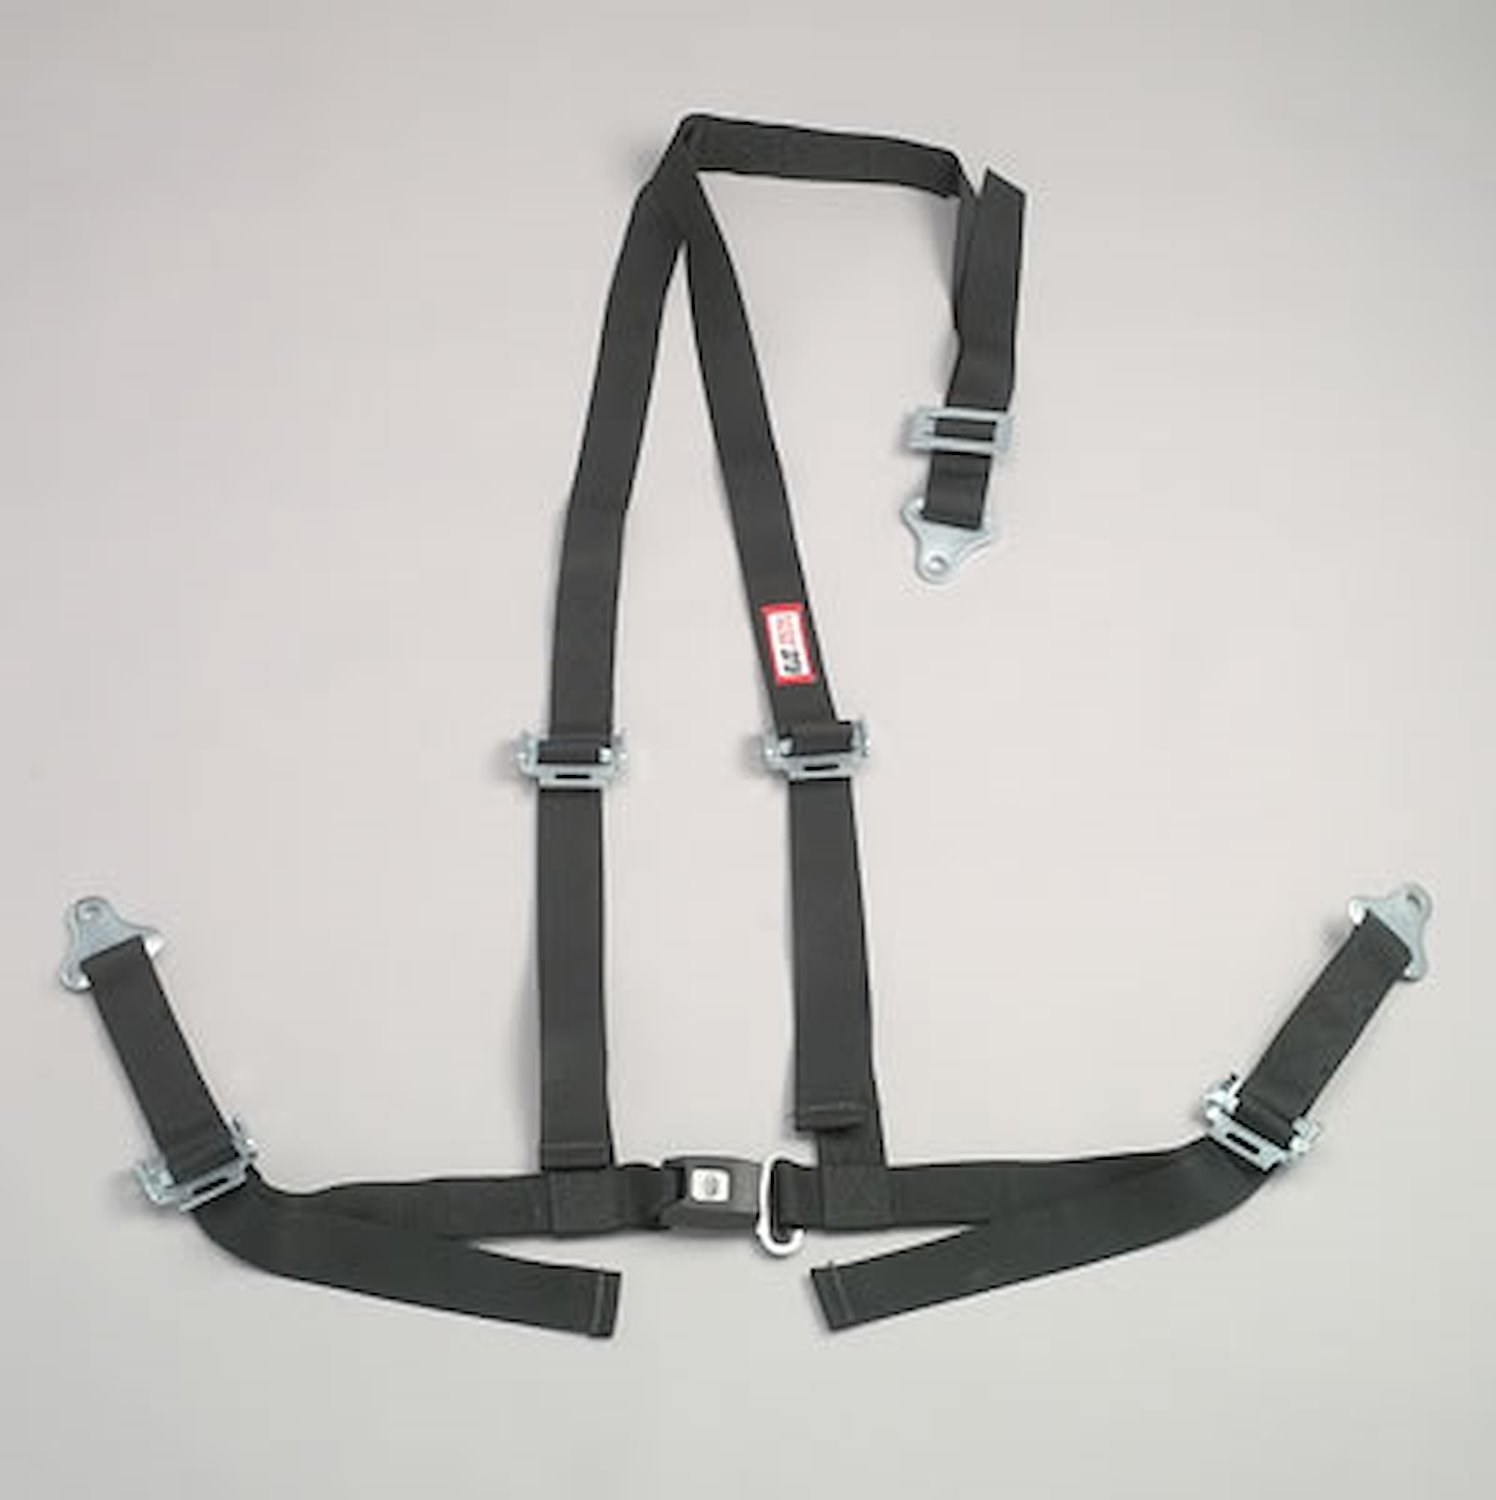 NON-SFI B&T HARNESS 2 PULL UP Lap Belt BOLT 2 S. H. Individual ROLL BAR Mount WRAP/BOLT RED